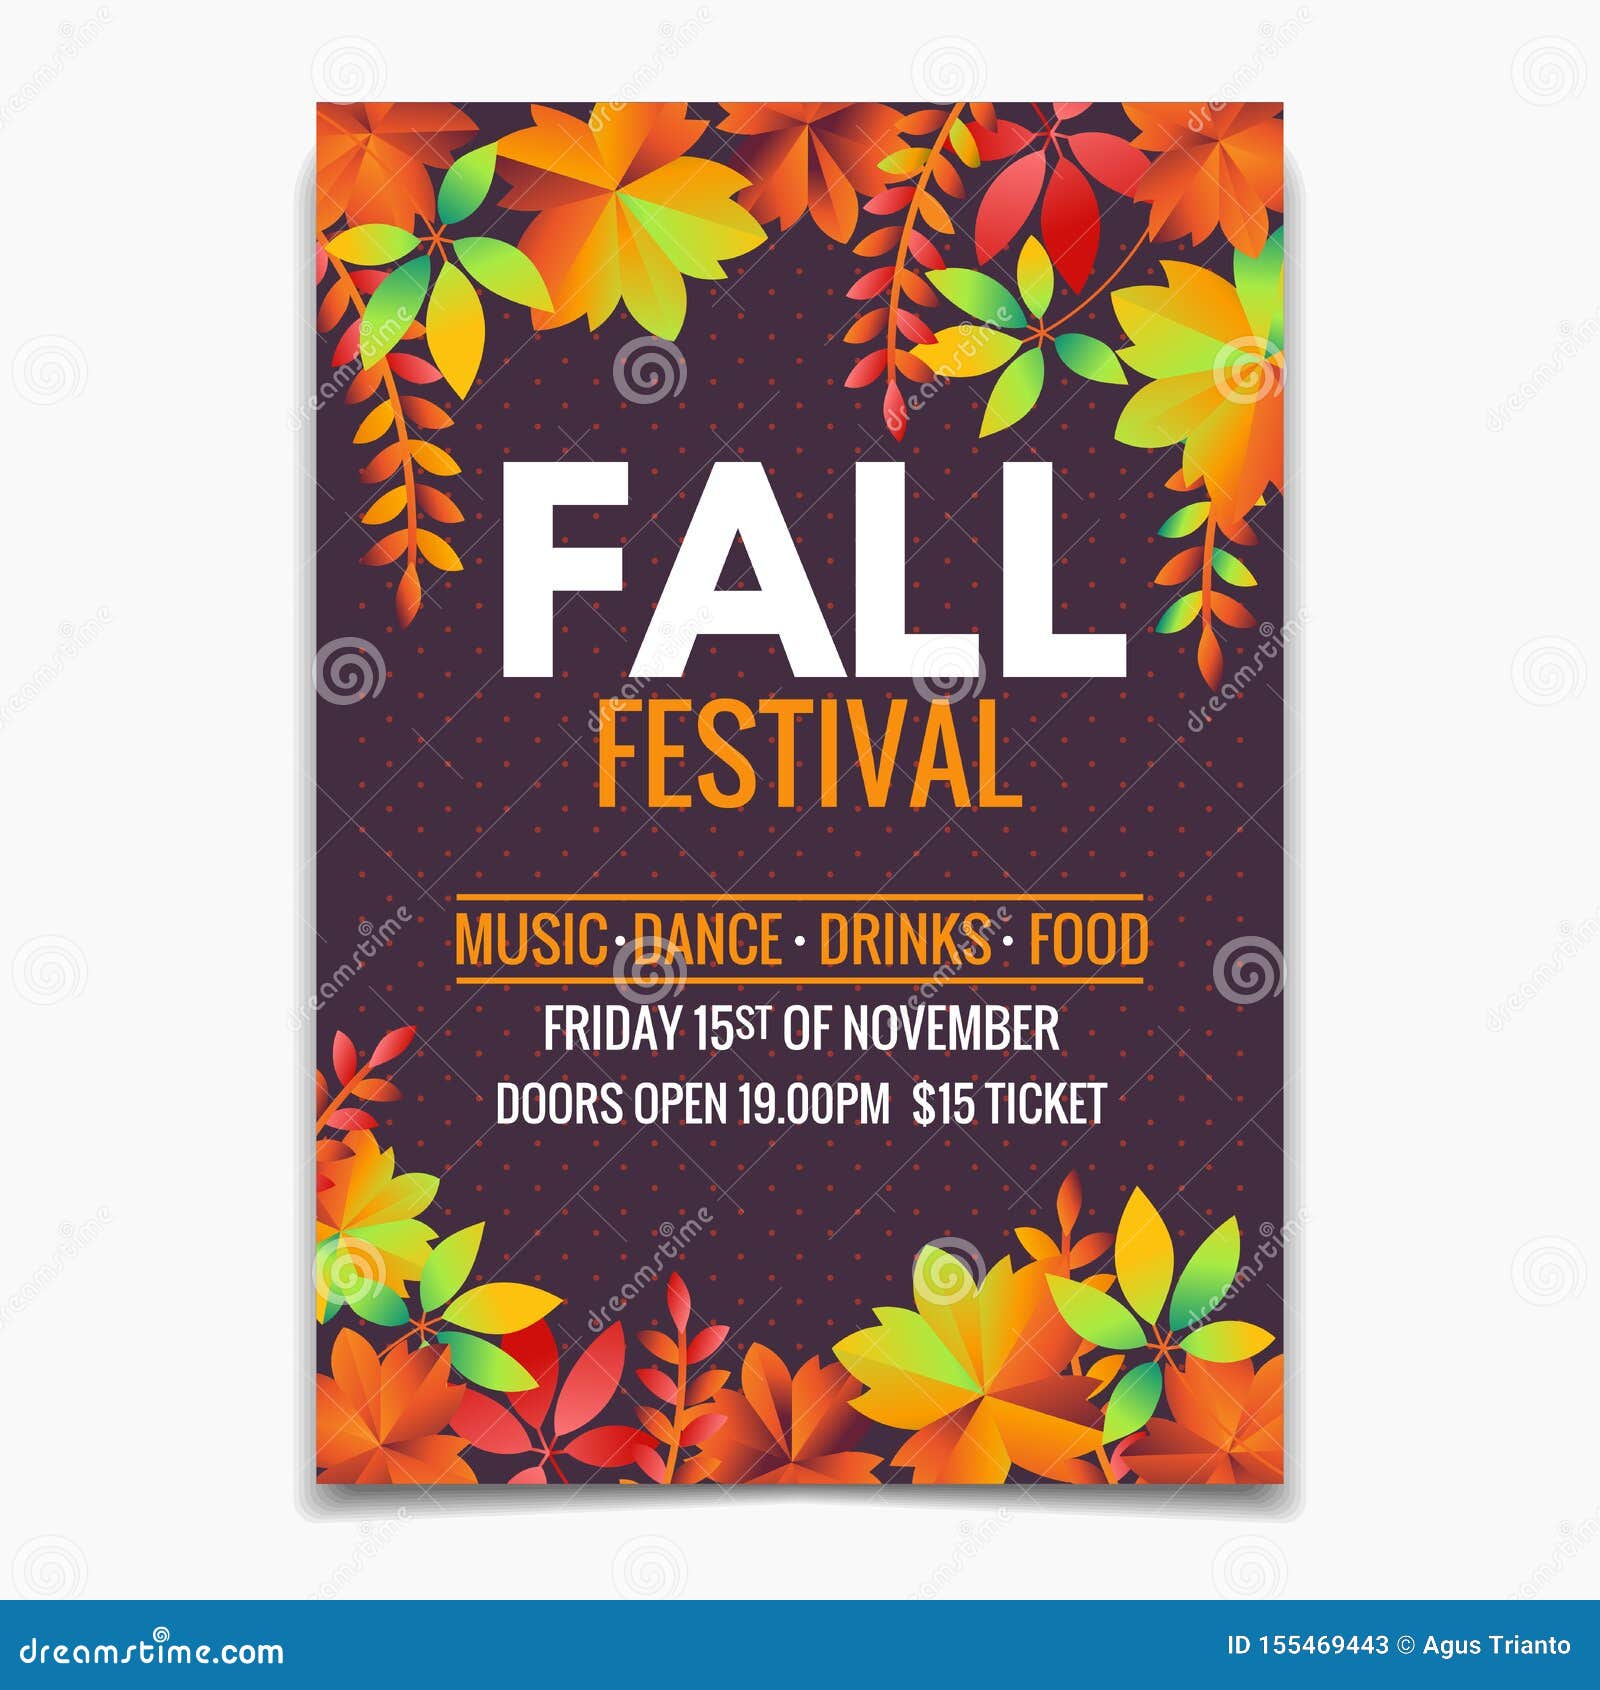 Fall Festival Flyer or Poster Template. Bright Autumn Leaves on Intended For Fall Festival Flyer Templates Free